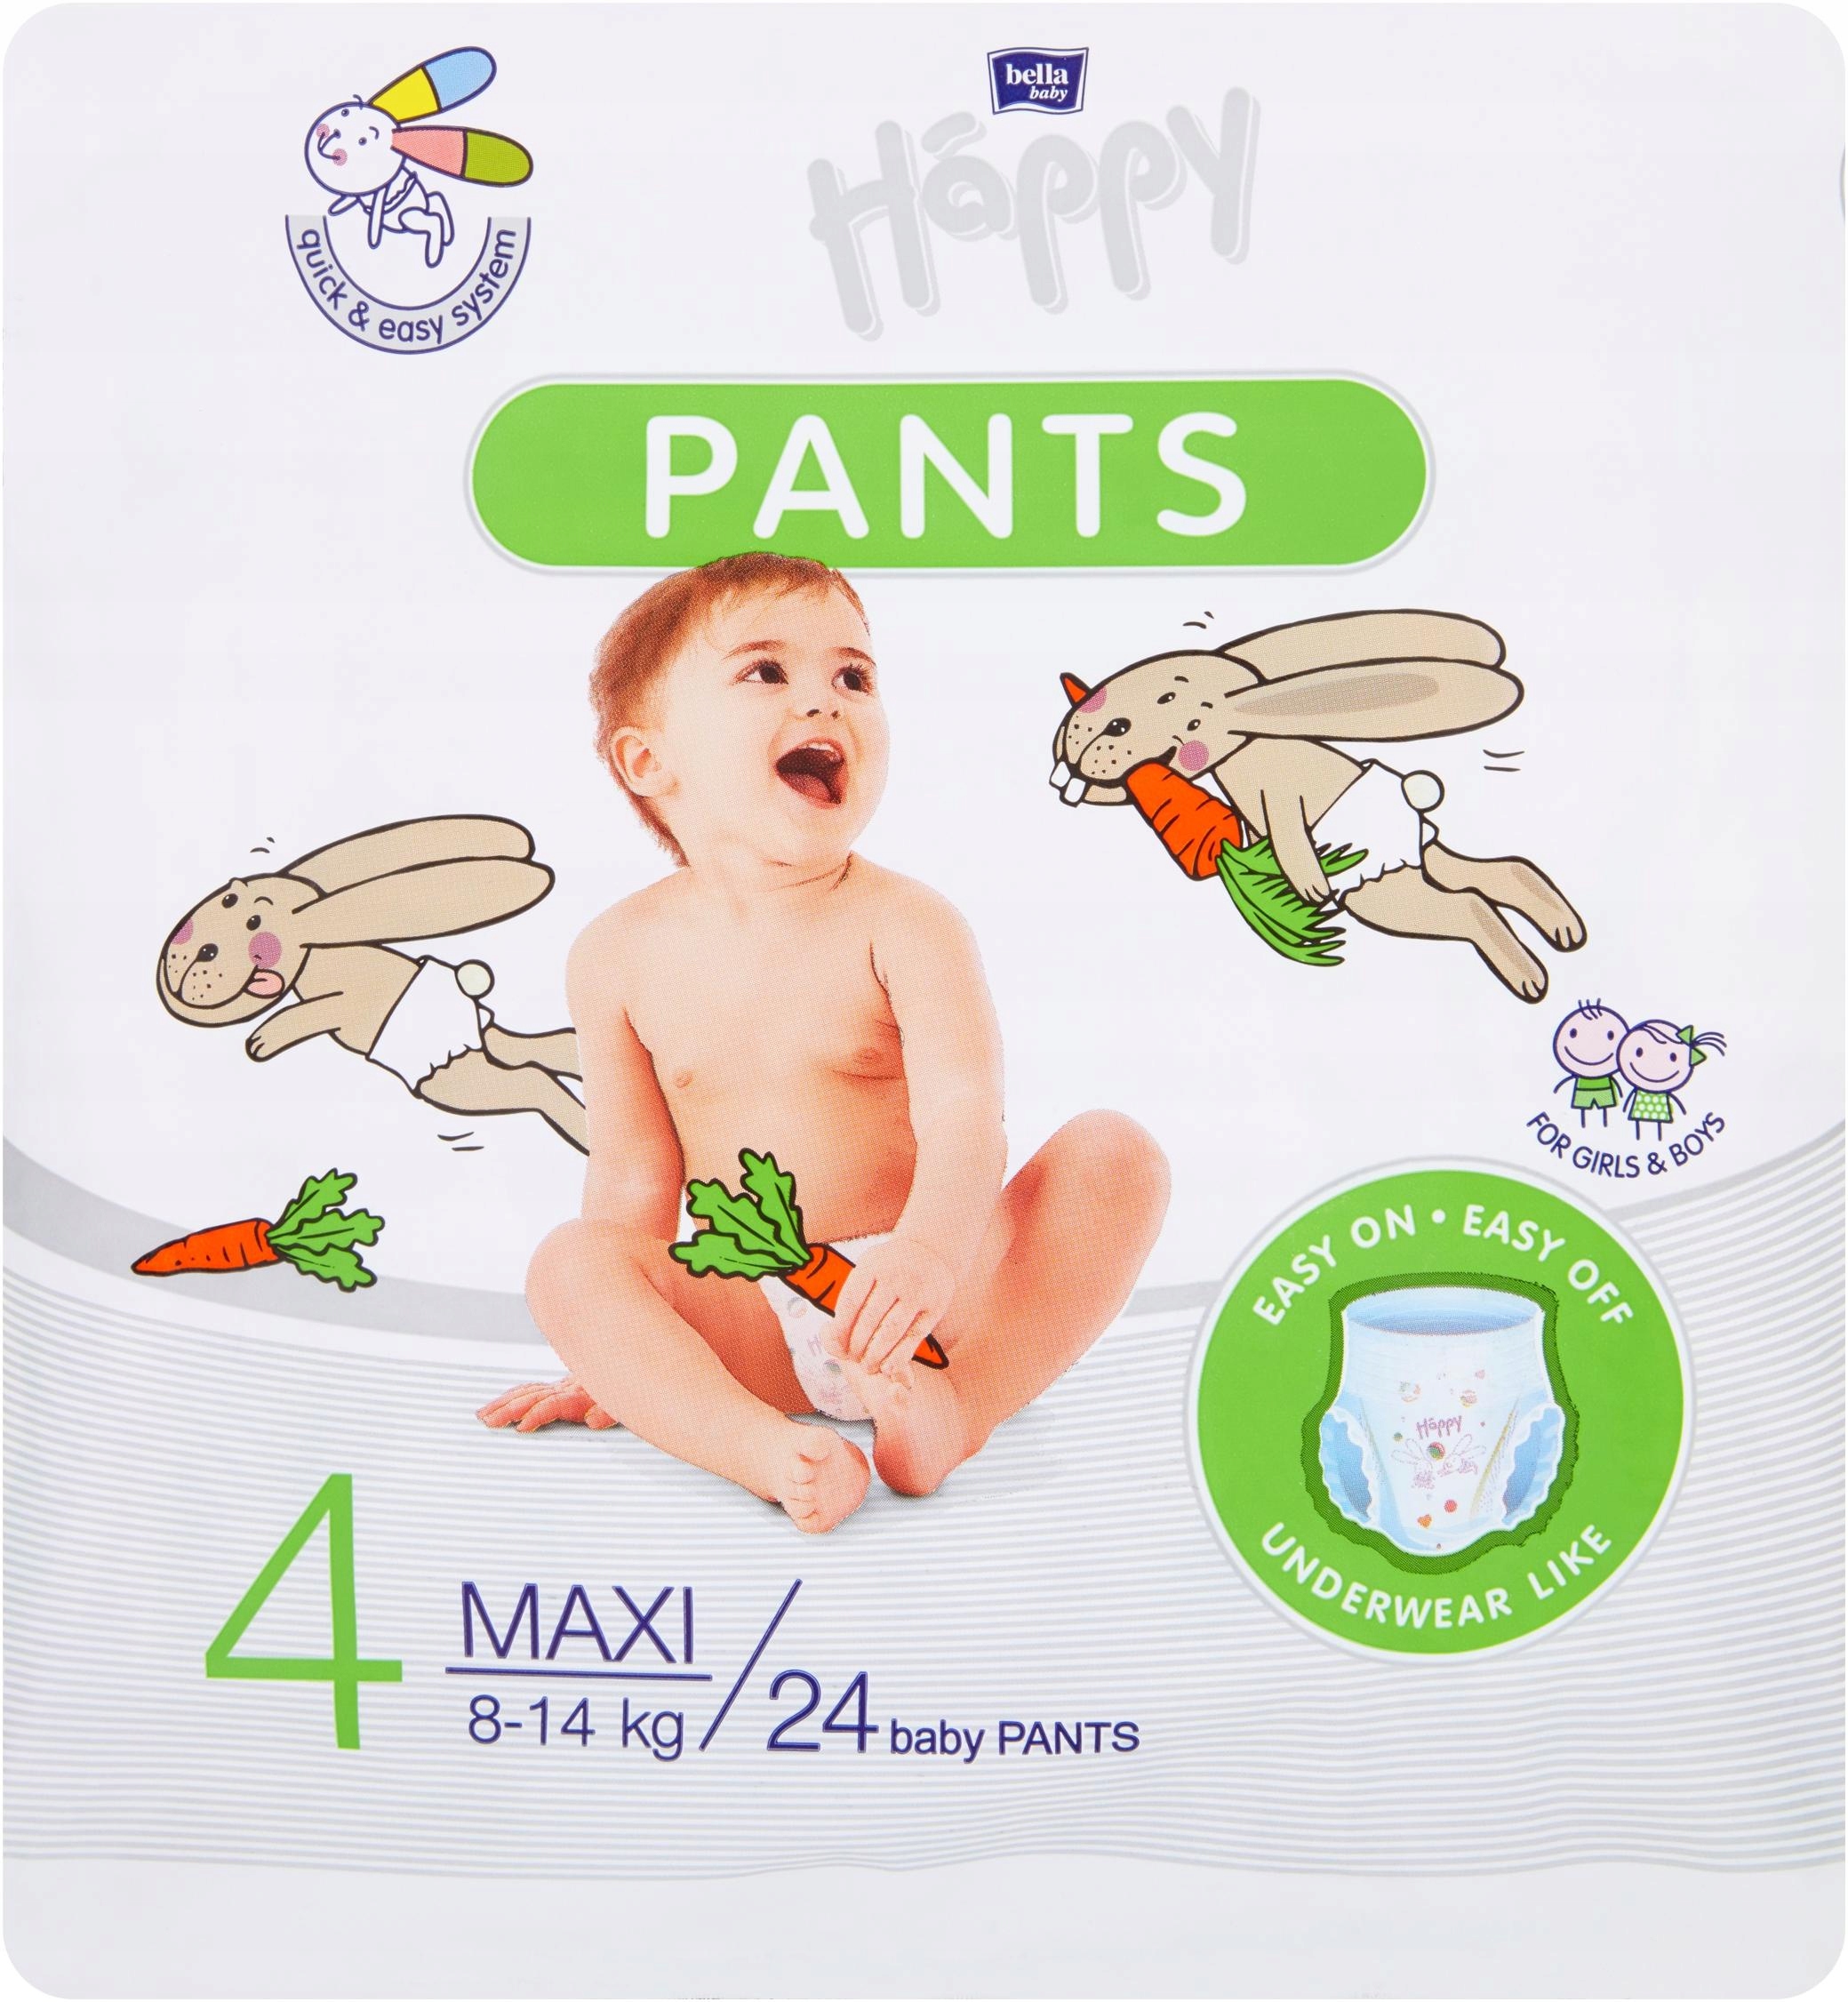 pampers baby love 2